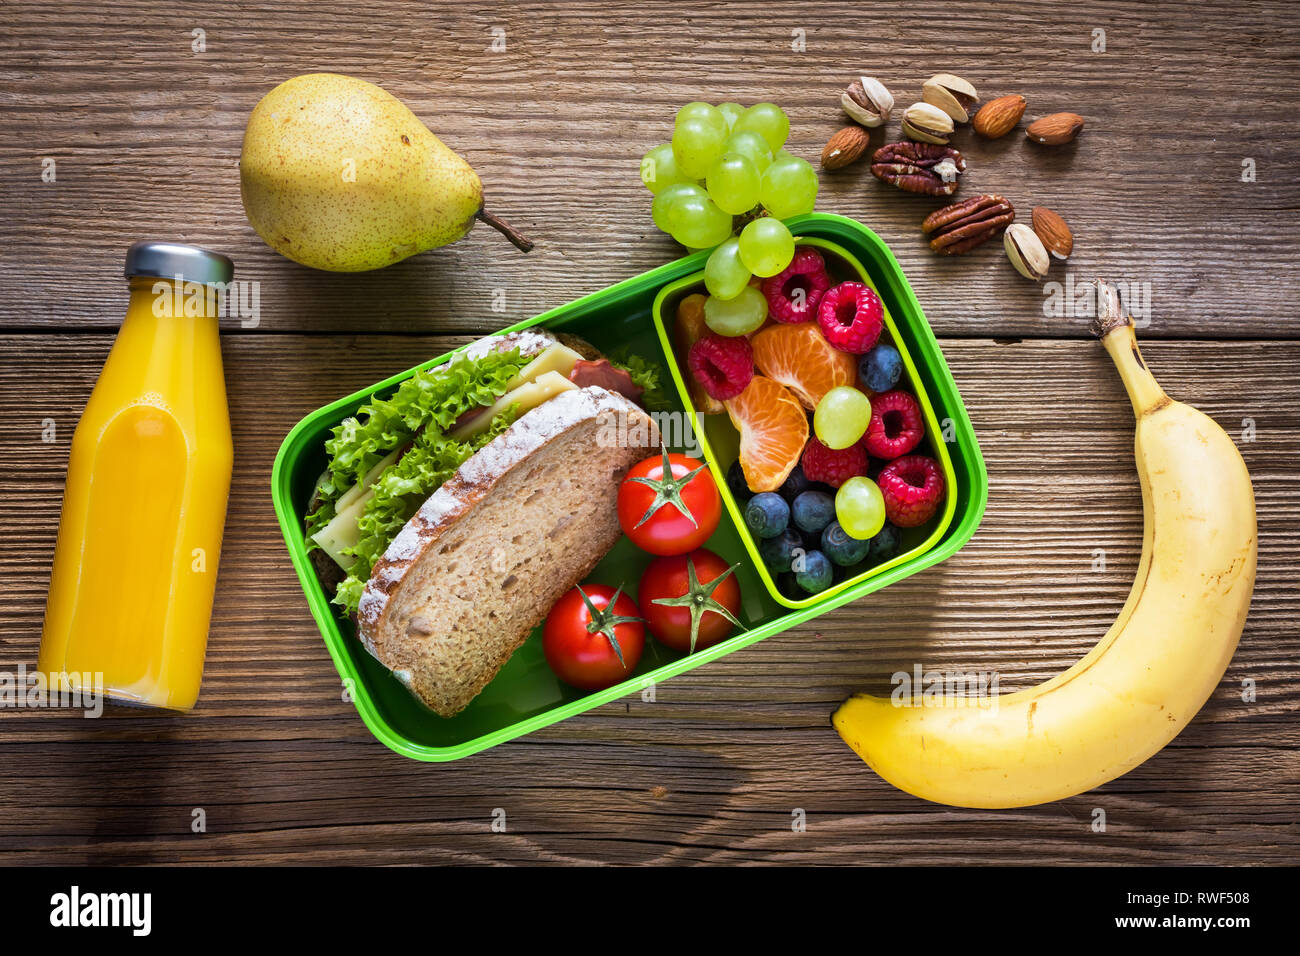 School lunch box with sandwich, vegetables, water, and fruits on table.  Healthy eating habits concept Stock Photo - Alamy